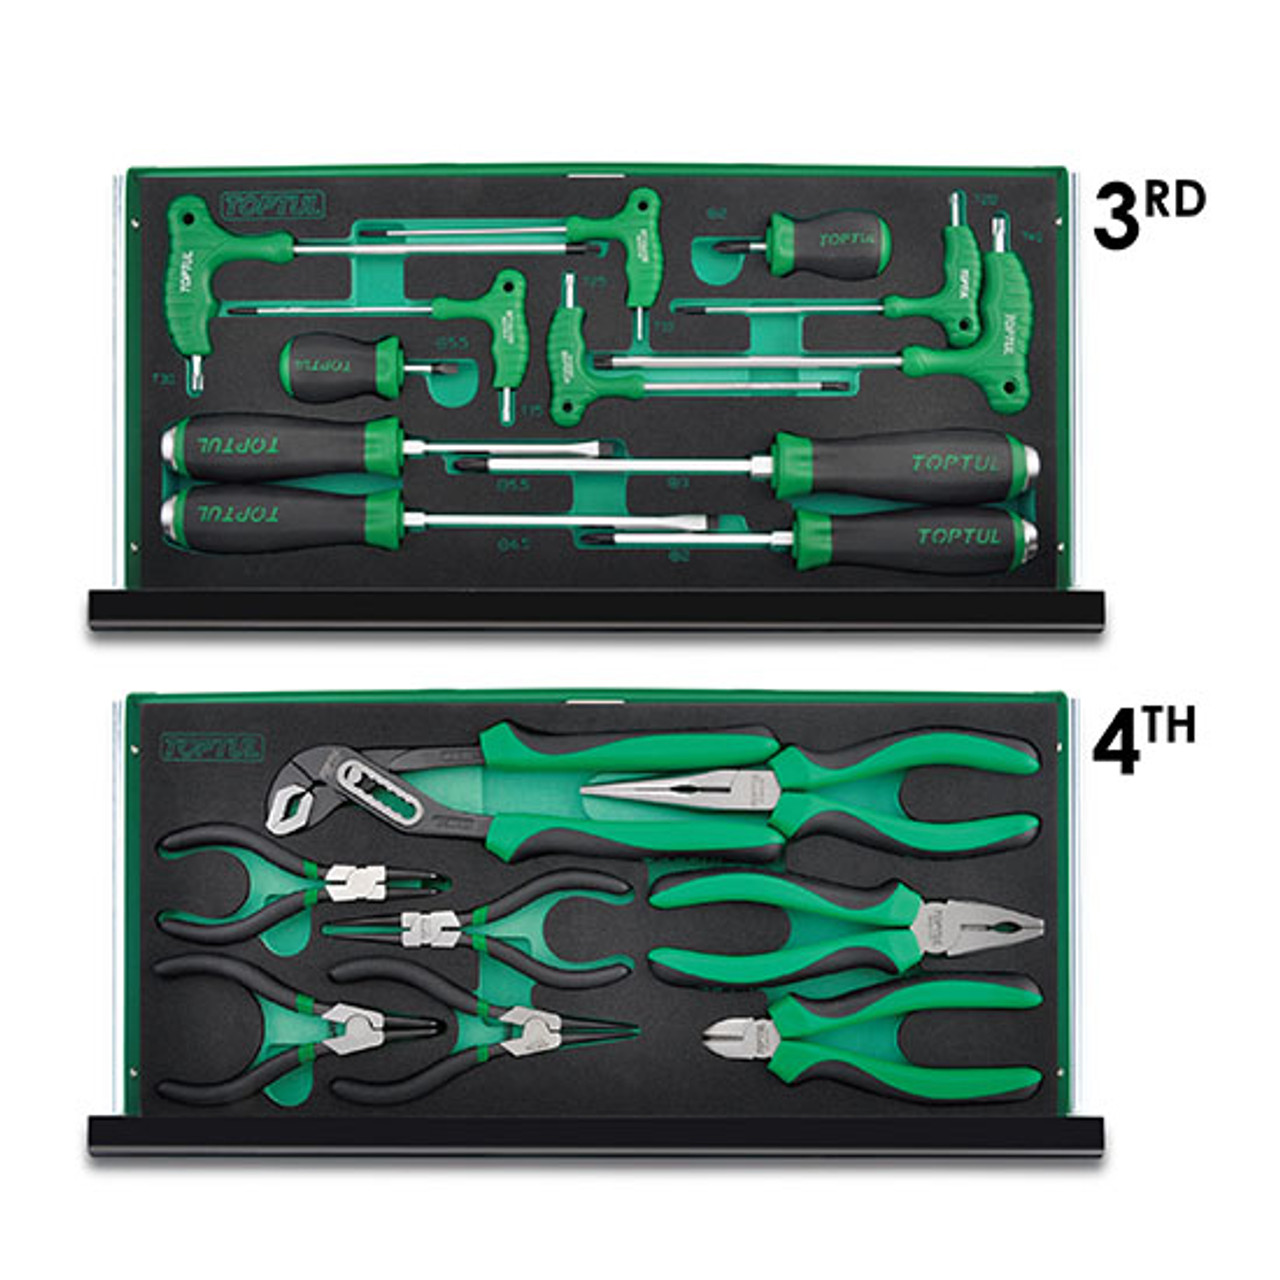 Toptul 82pc Professional Mechanical Tool Chest Set GREEN - 3rd and 4th drawer